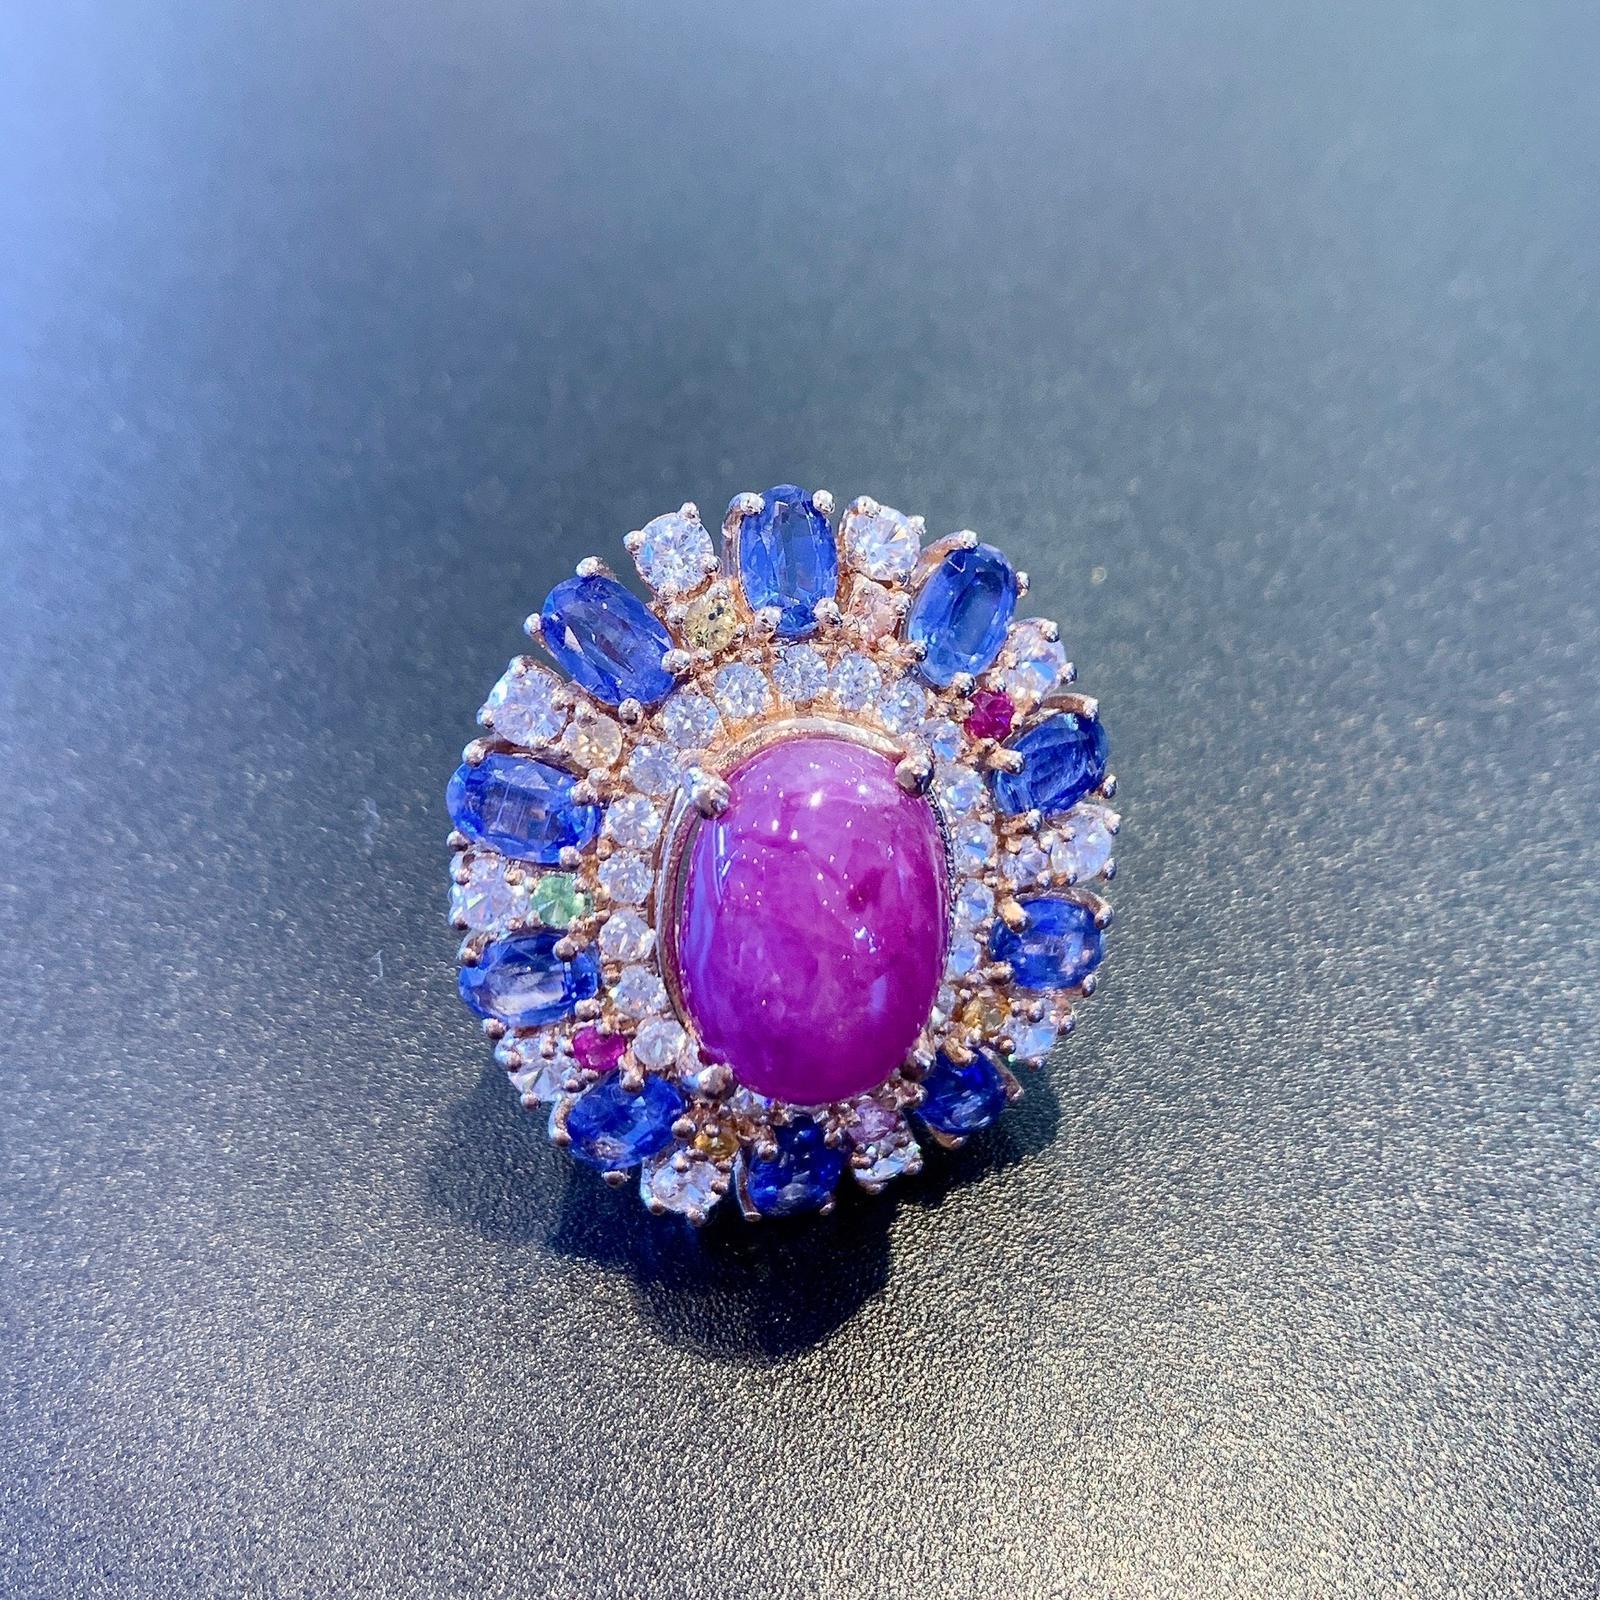 Bochic Ruby, Tanzanite & Fancy Sapphire Candy Cocktail Ring Set in 22K Gold 1